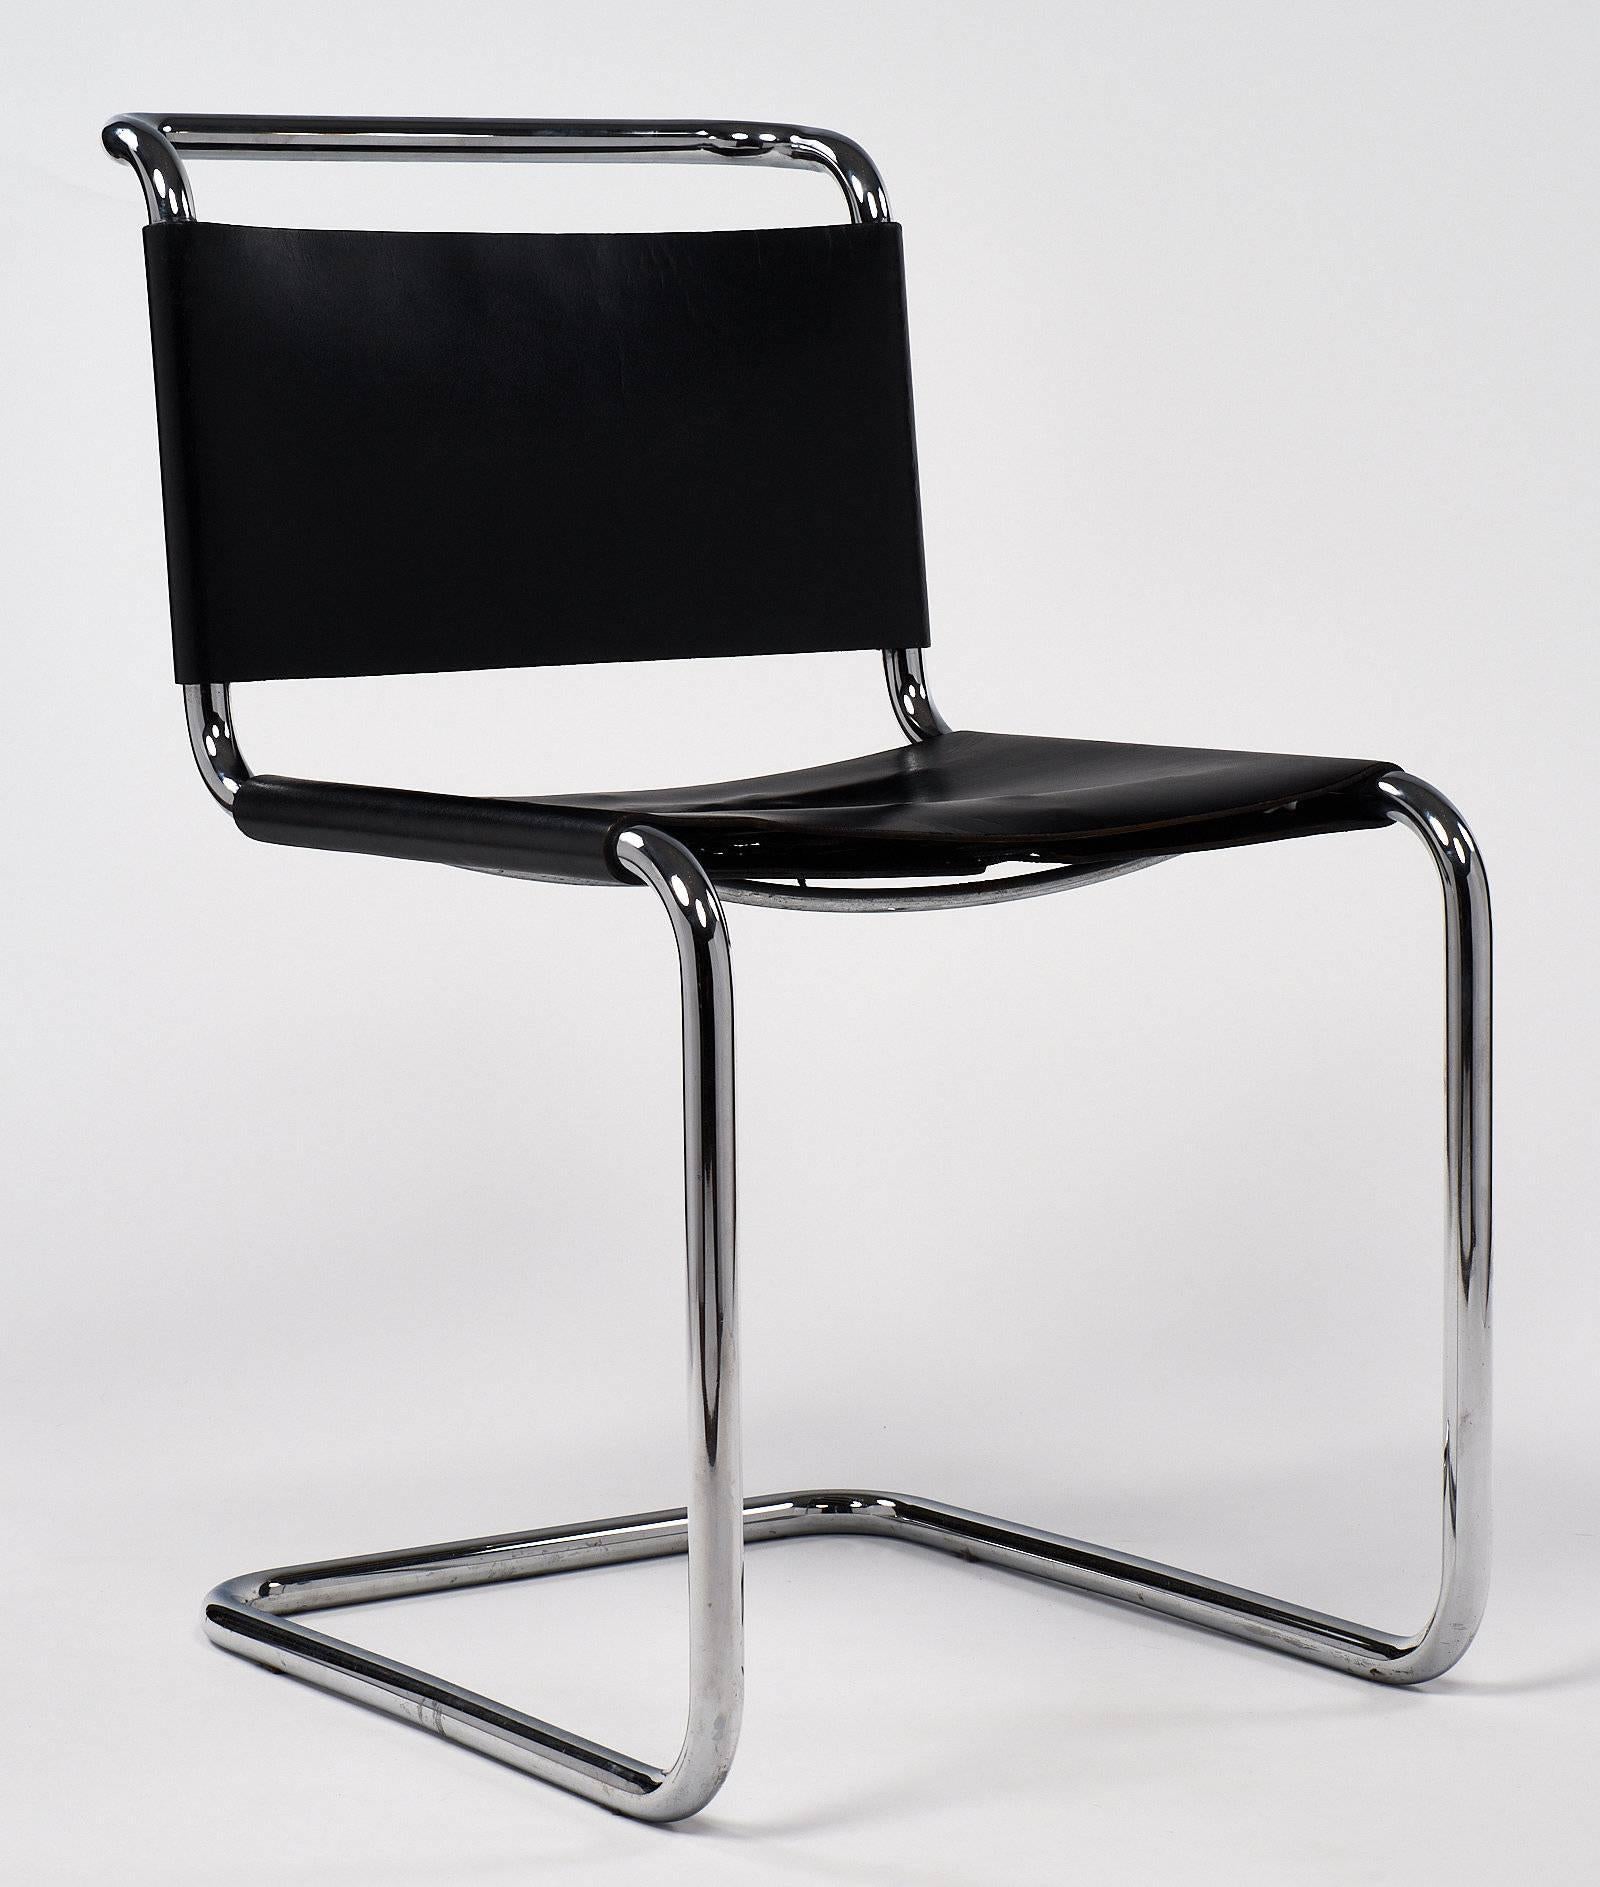 marcel breuer chair leather